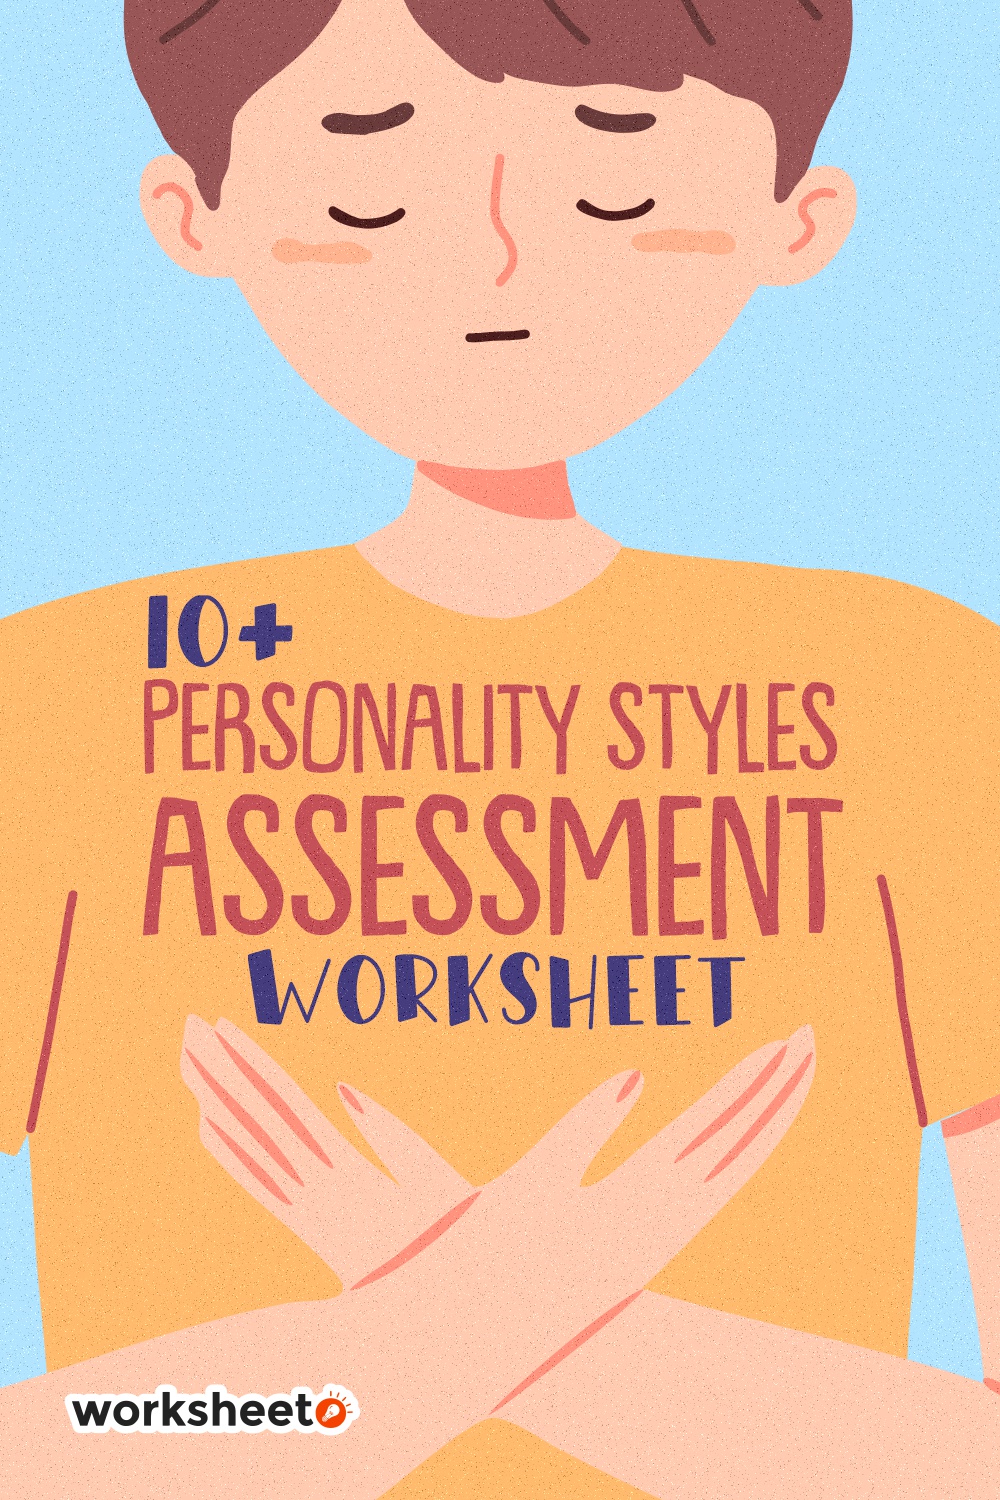 18 Images of Personality Styles Assessment Worksheet